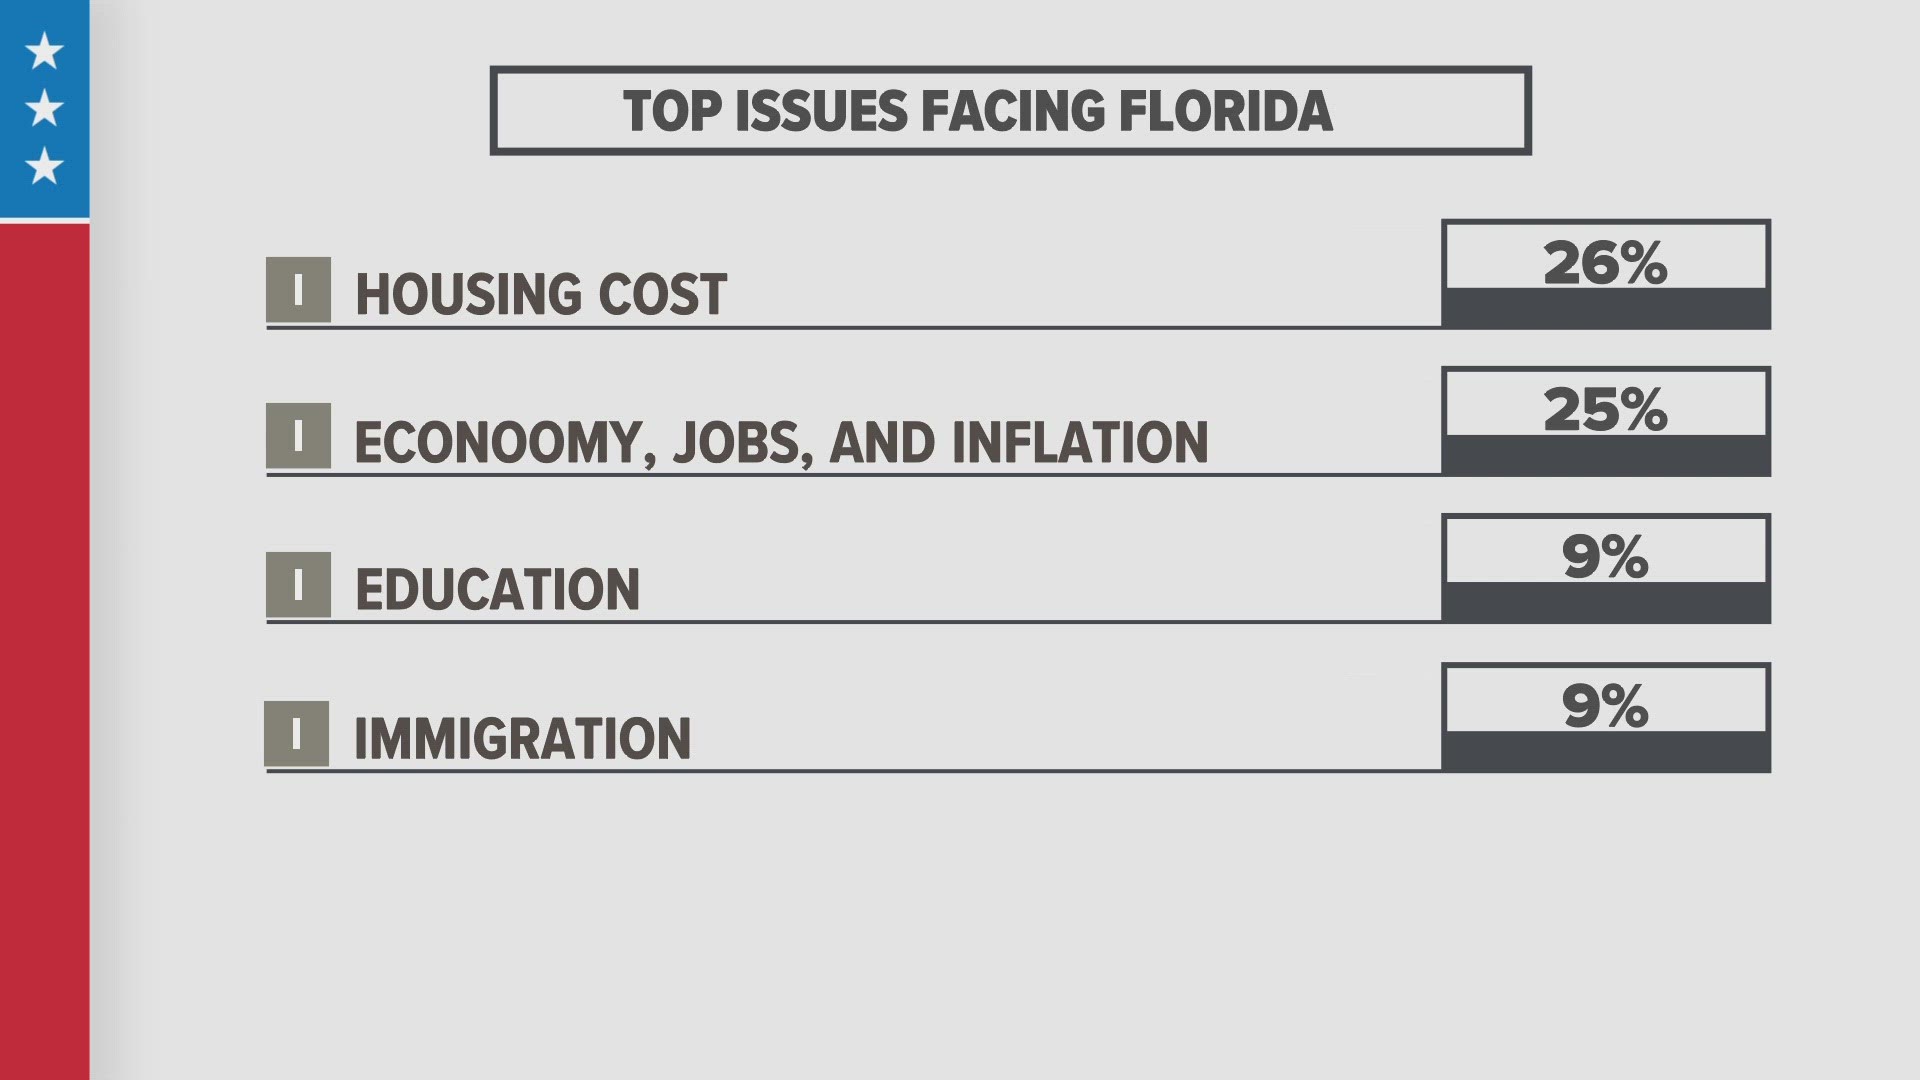 According to the poll, housing costs is the top issue concerning Florida voters. The poll was also conducted by 700 registered Florida voters, split between parties.